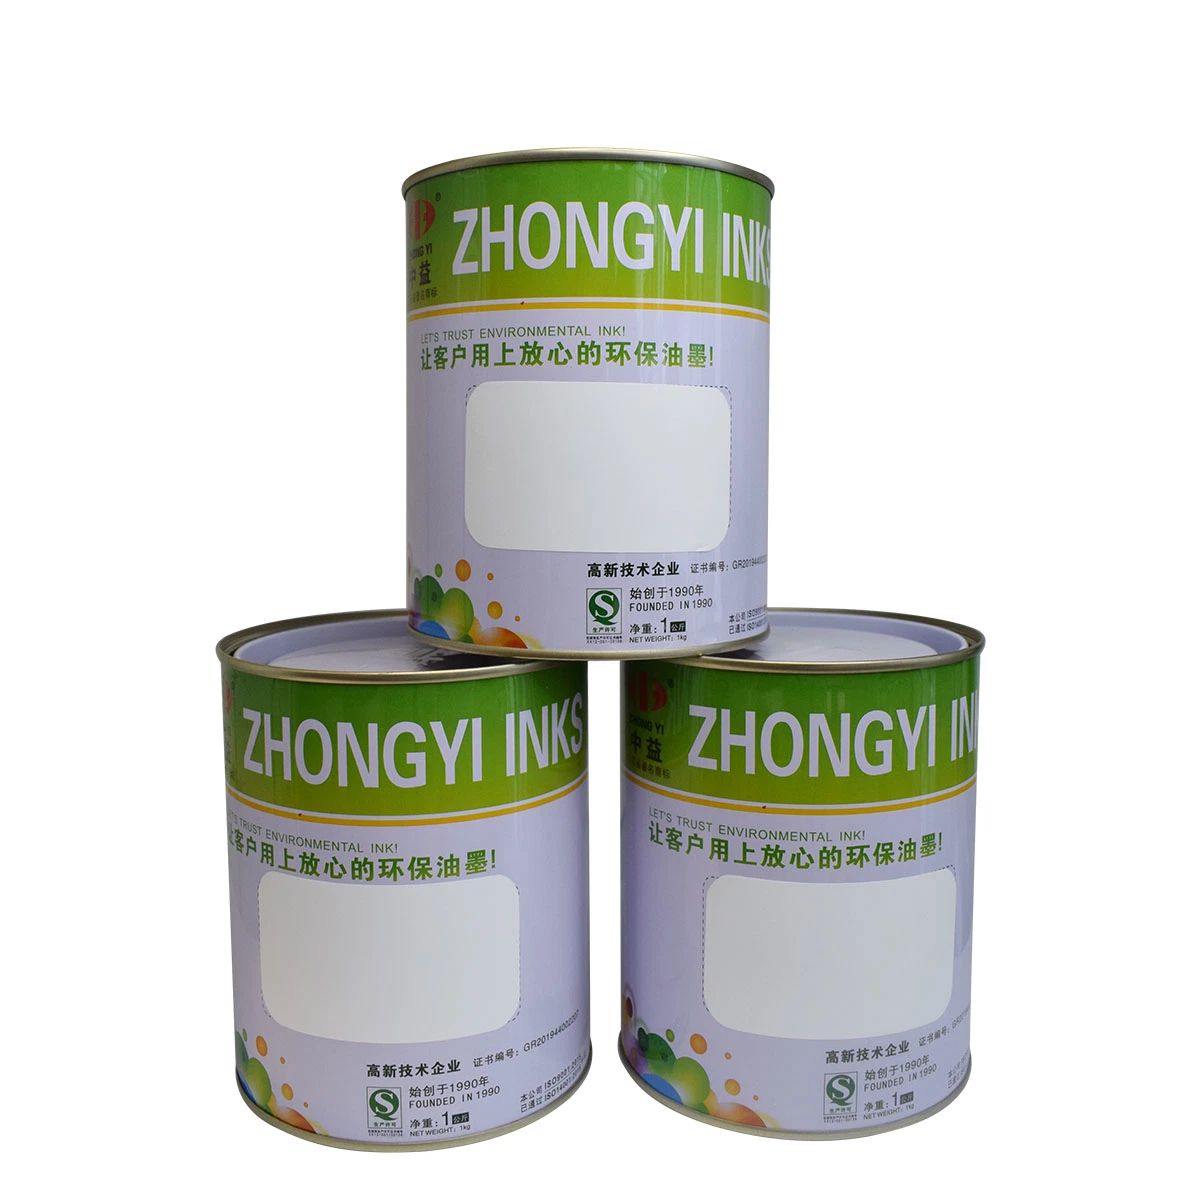 Zhongyi Alcohol-Resistant Sy Series Glossy Screen Printing Ink for ABS, PC, PMMA, PVC and Other Plastic Substrates